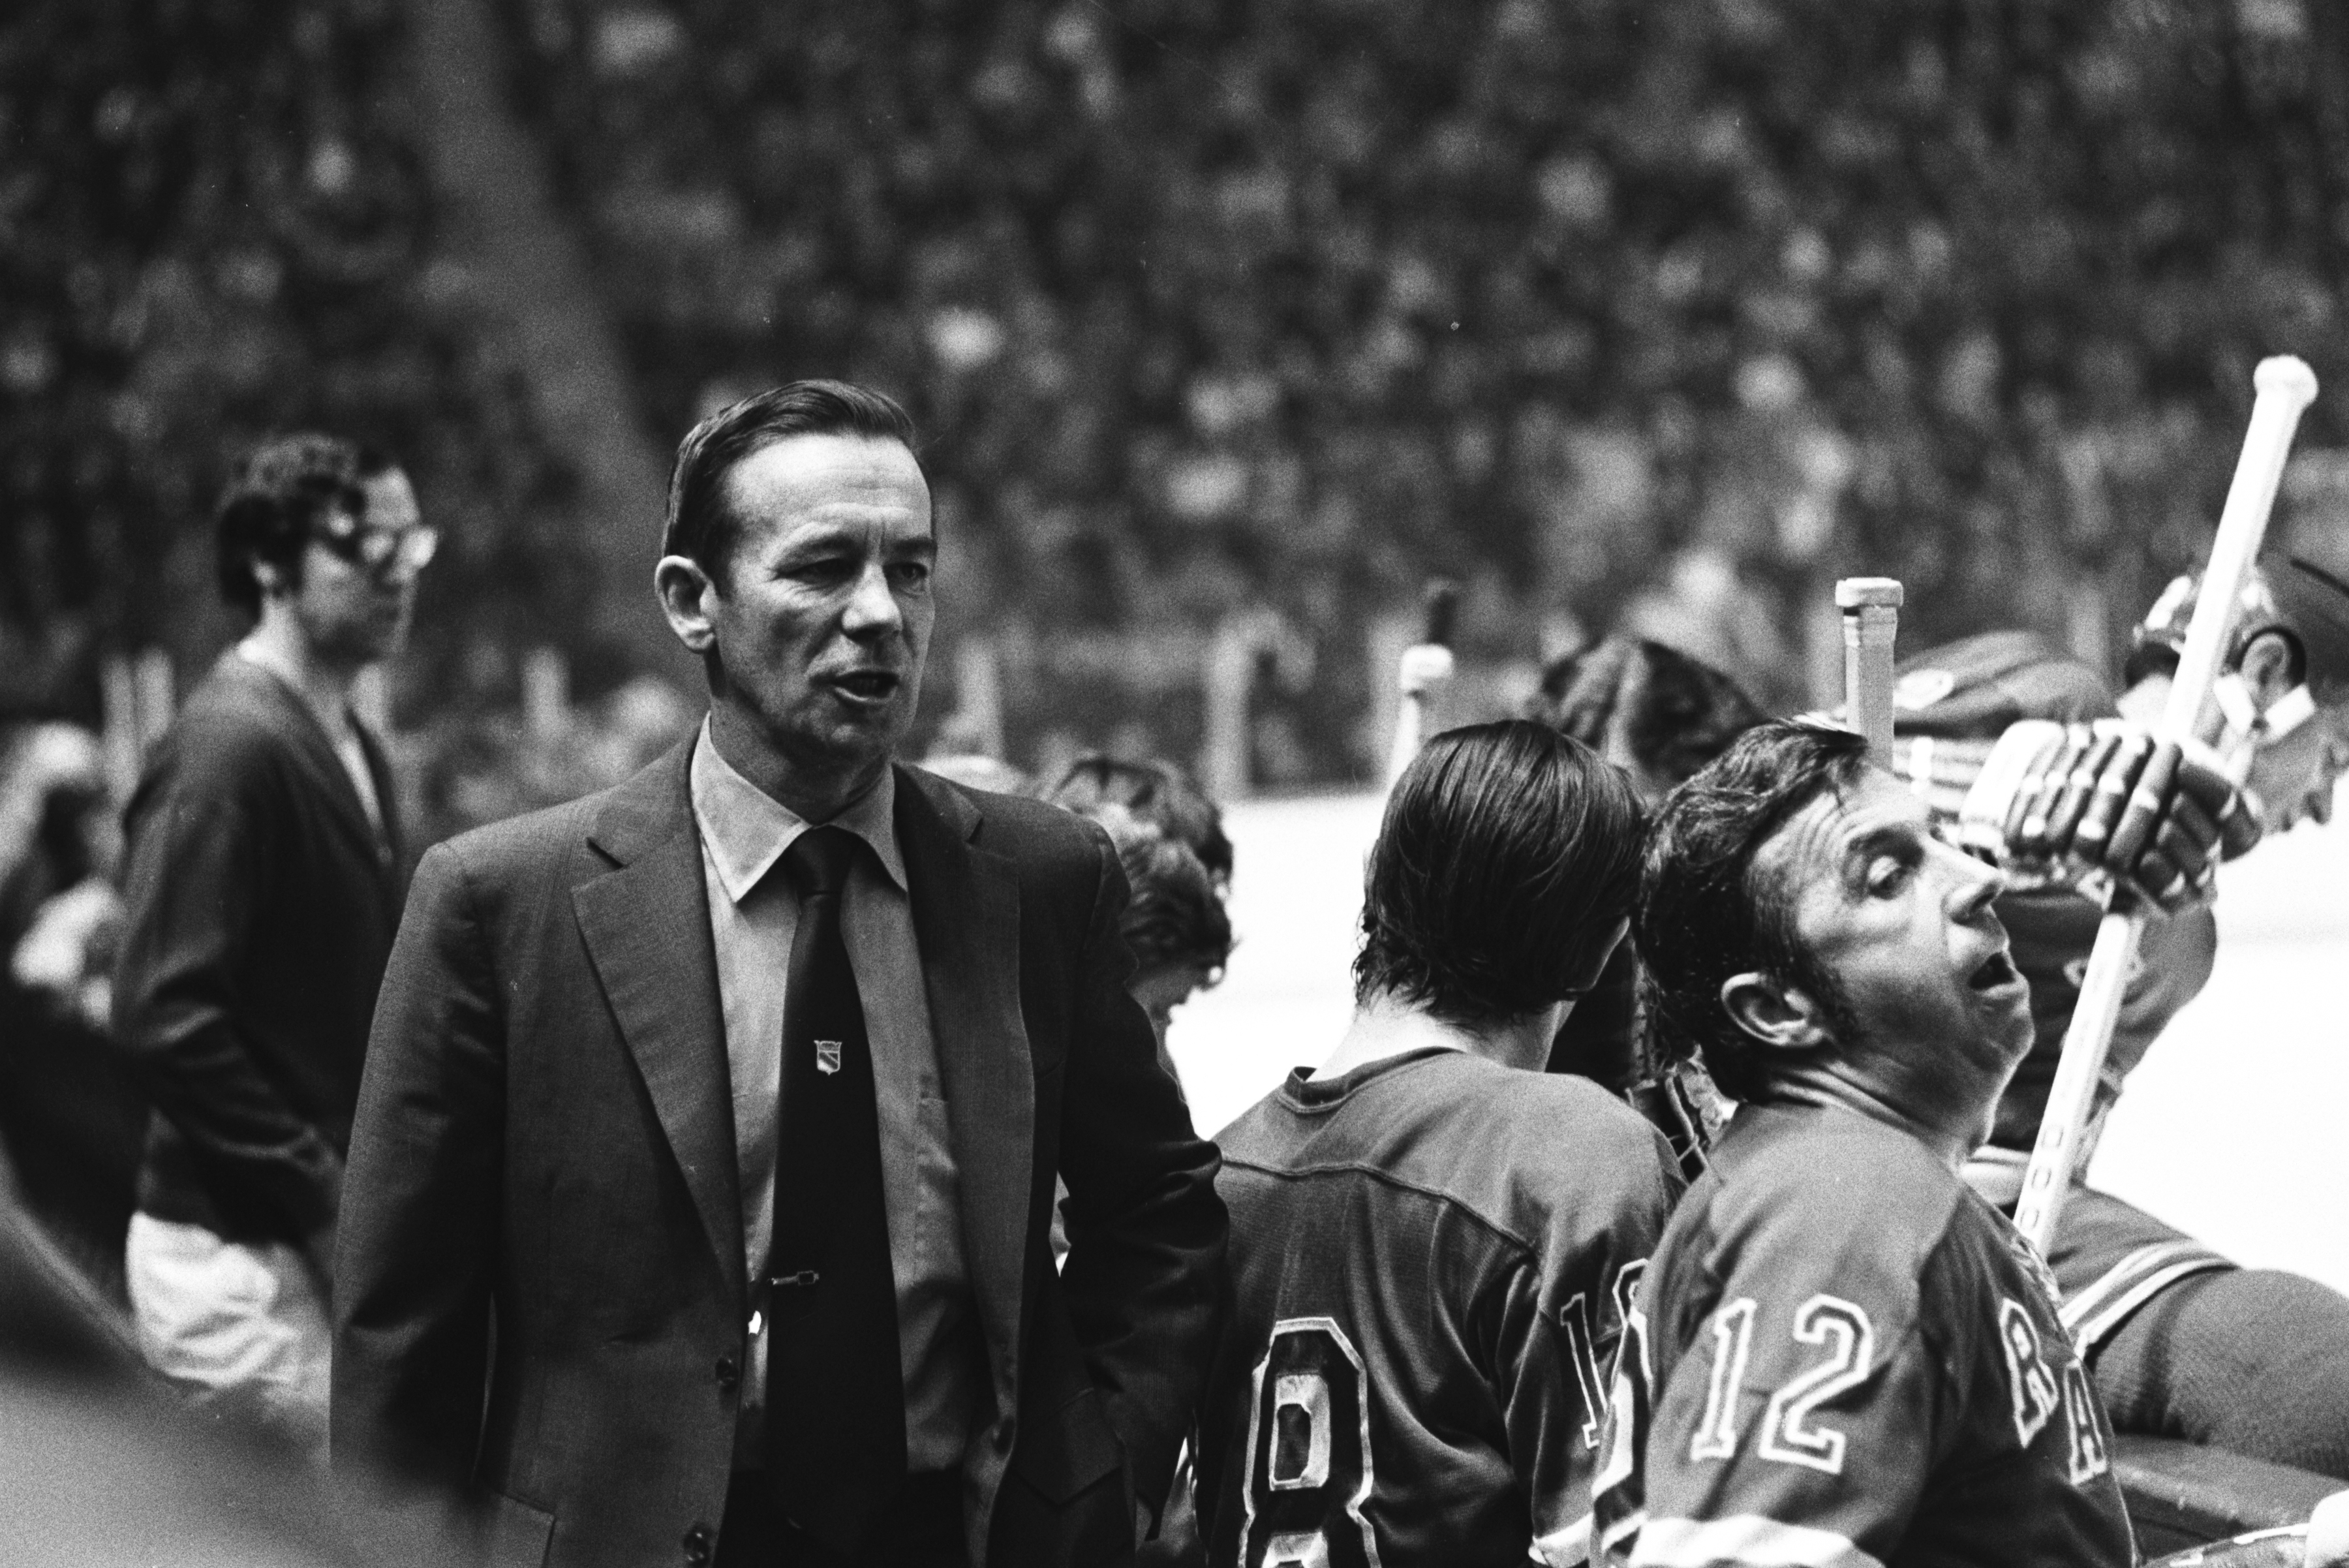 MONTREAL, CANADA- CIRCA 1972: Head Coach Emile Francis of the New York Rangers follows the action from the bench Circa 1972 at the Montreal Forum in Montreal, Quebec, Canada. (Photo by Denis Brodeur/NHLI via Getty Images)